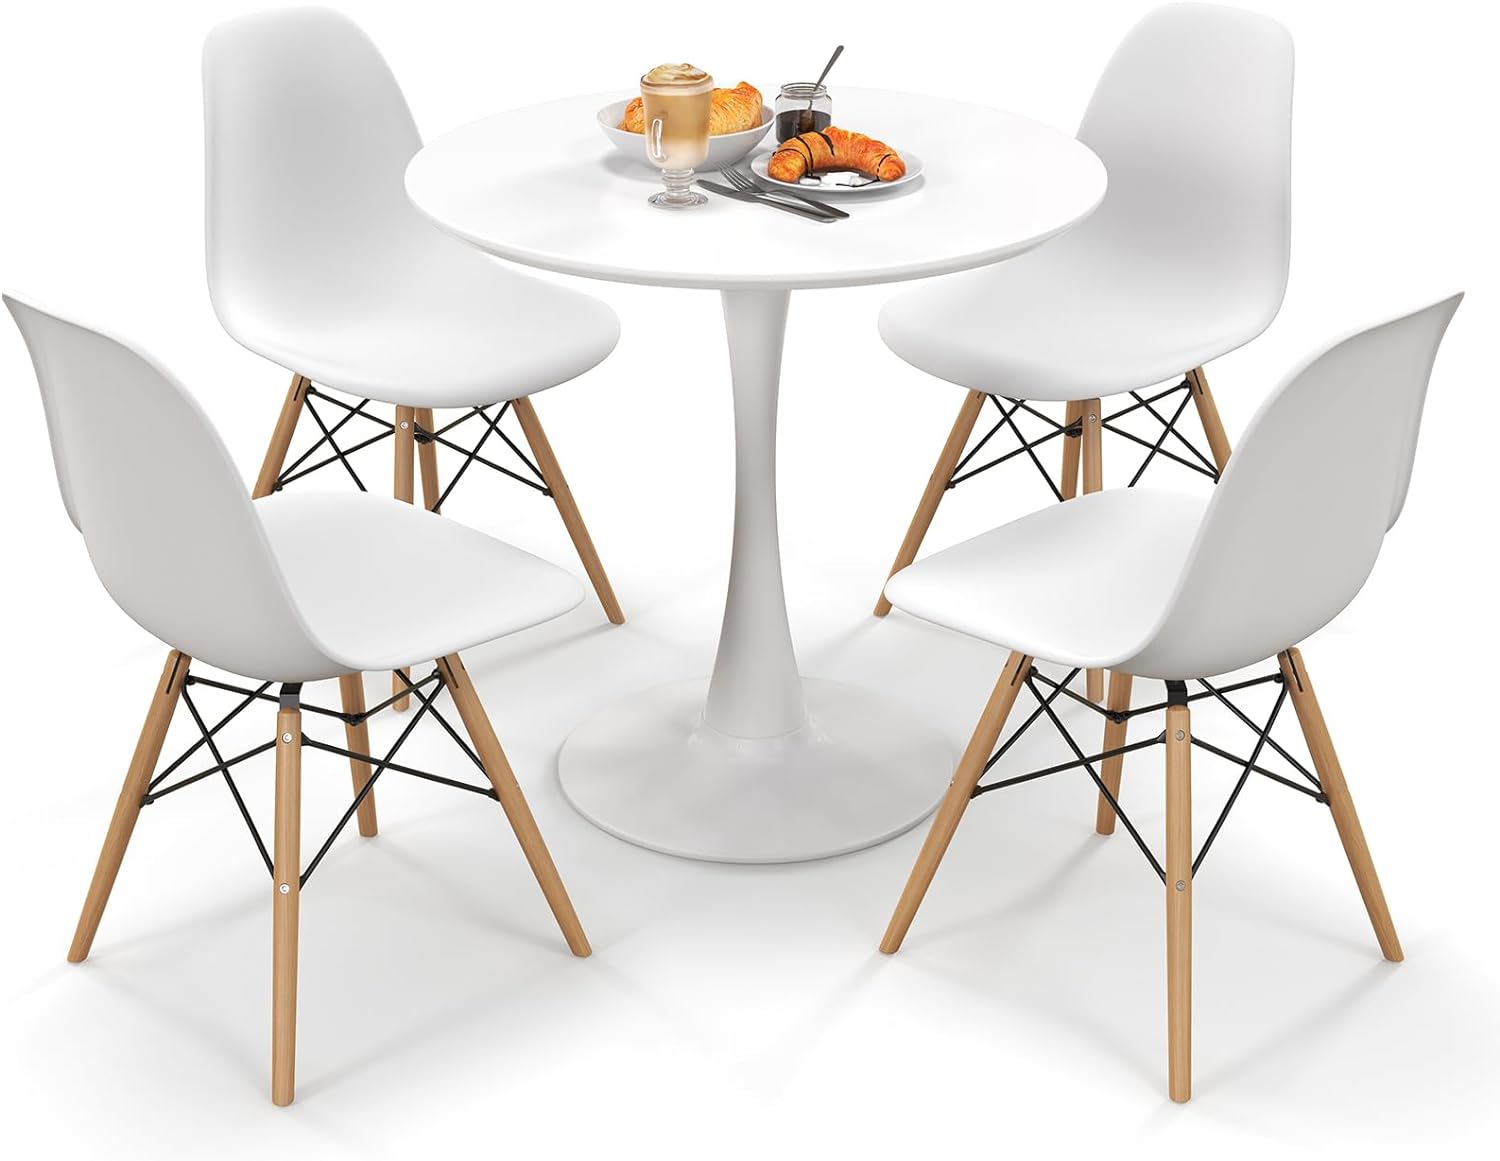 Giantex 3-Piece Dining Room Table Set for 2, Compact Kitchen Dining Table Set with 32" Round Table and DSW Chairs